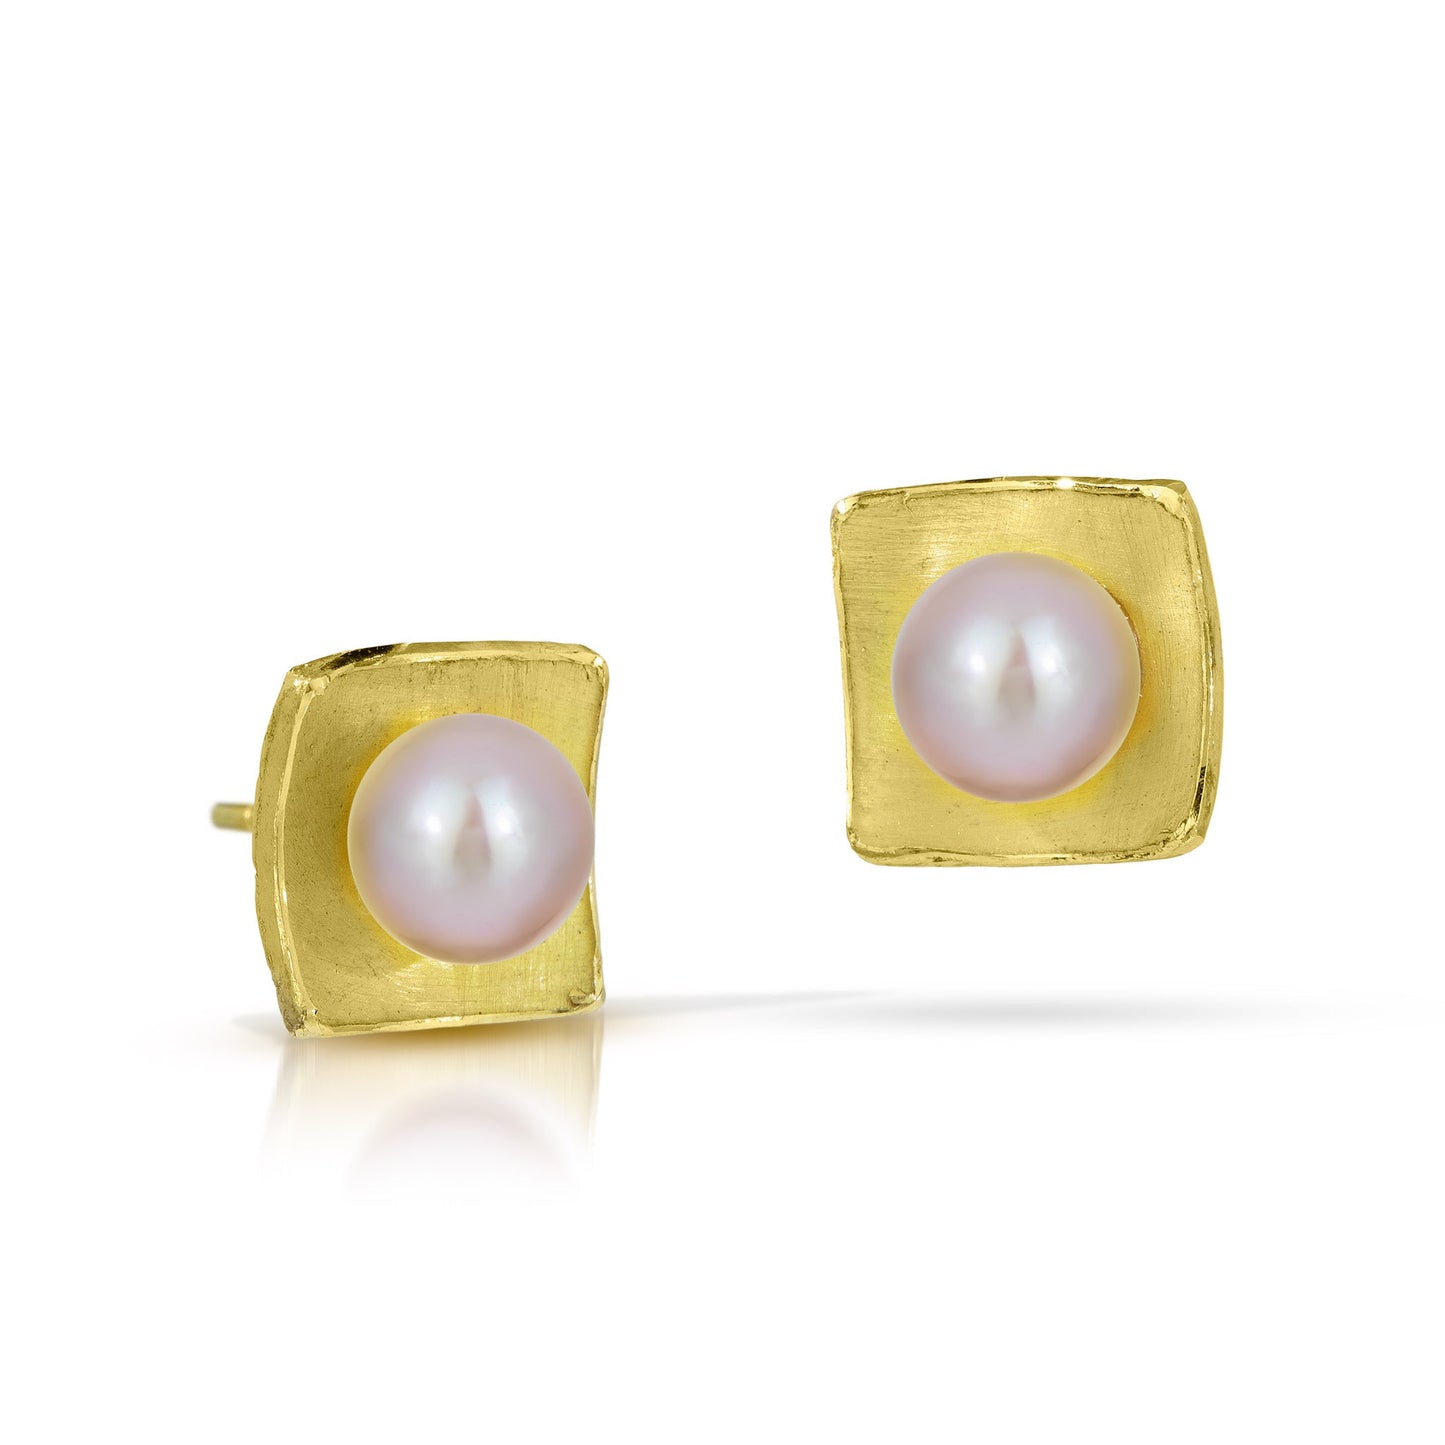 Silver Concave Square with Natural Pearl Earrings